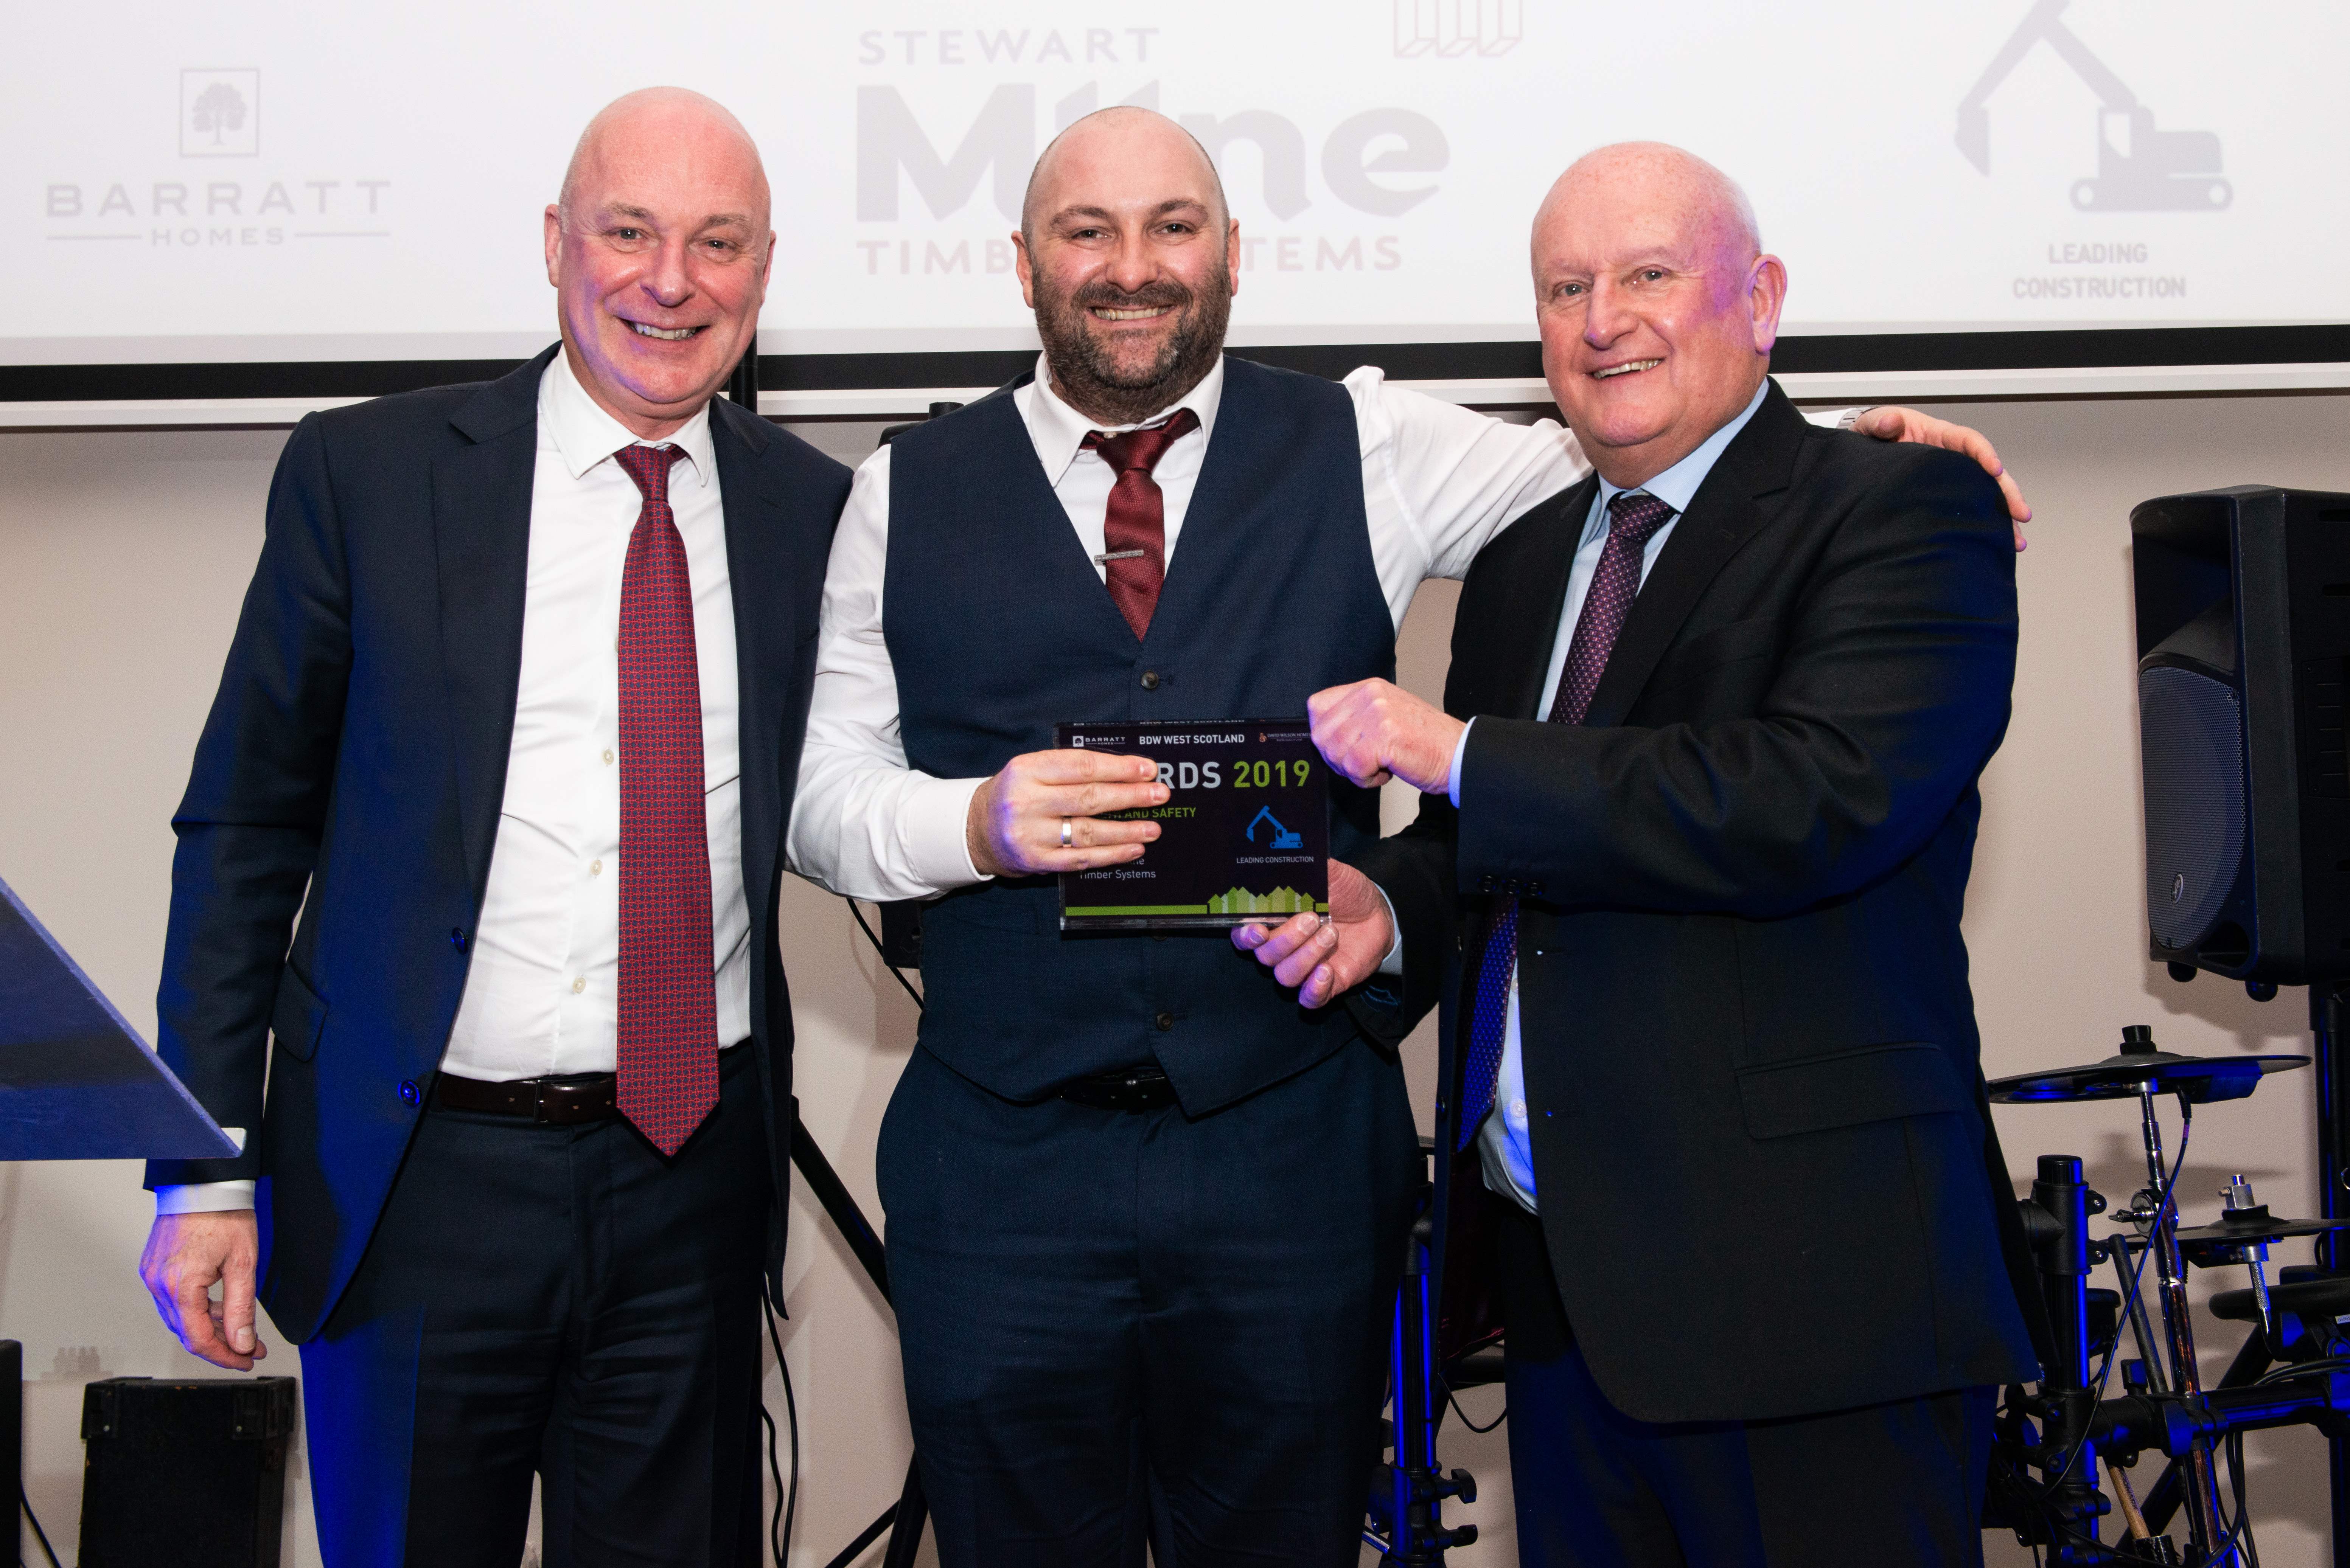 Stewart Milne Timber Systems wins Barratt’s Health and Safety Award